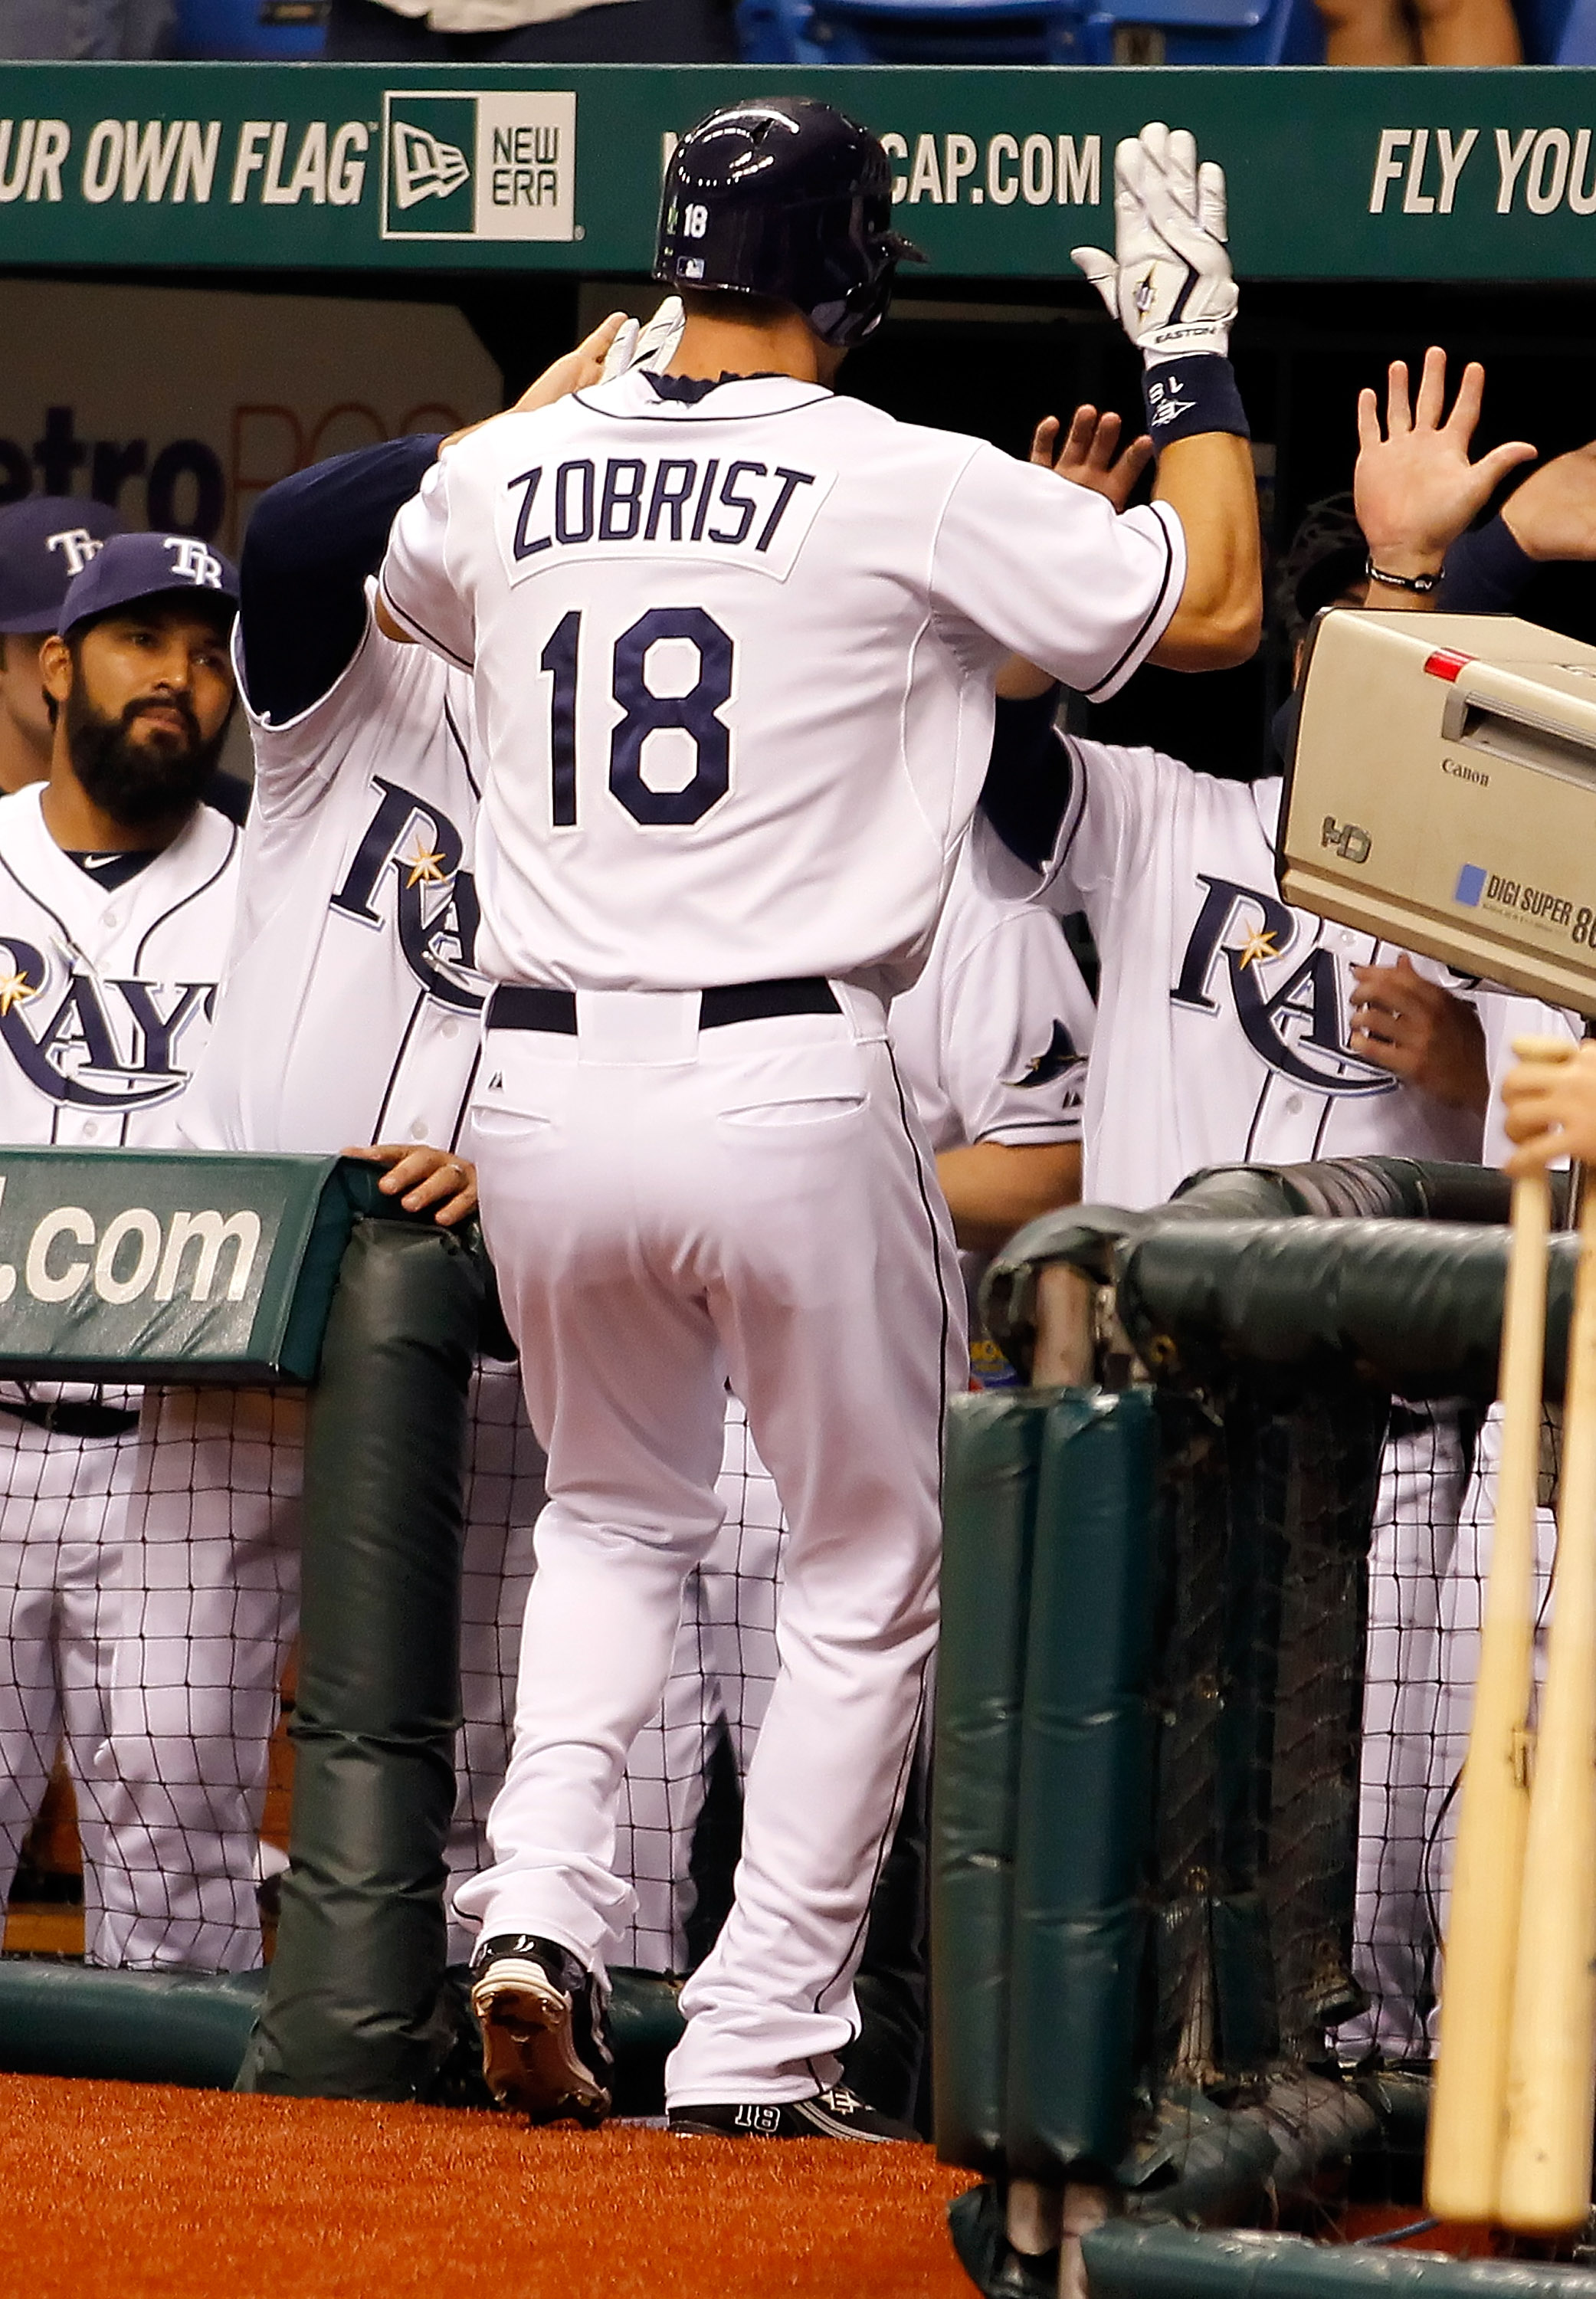 ST PETERSBURG, FL - APRIL 18:  Outfielder Ben Zobrist #18 of the Tampa Bay Rays is congratulated after his home run against the Chicago White Sox during the game at Tropicana Field on April 18, 2011 in St. Petersburg, Florida.  (Photo by J. Meric/Getty Im